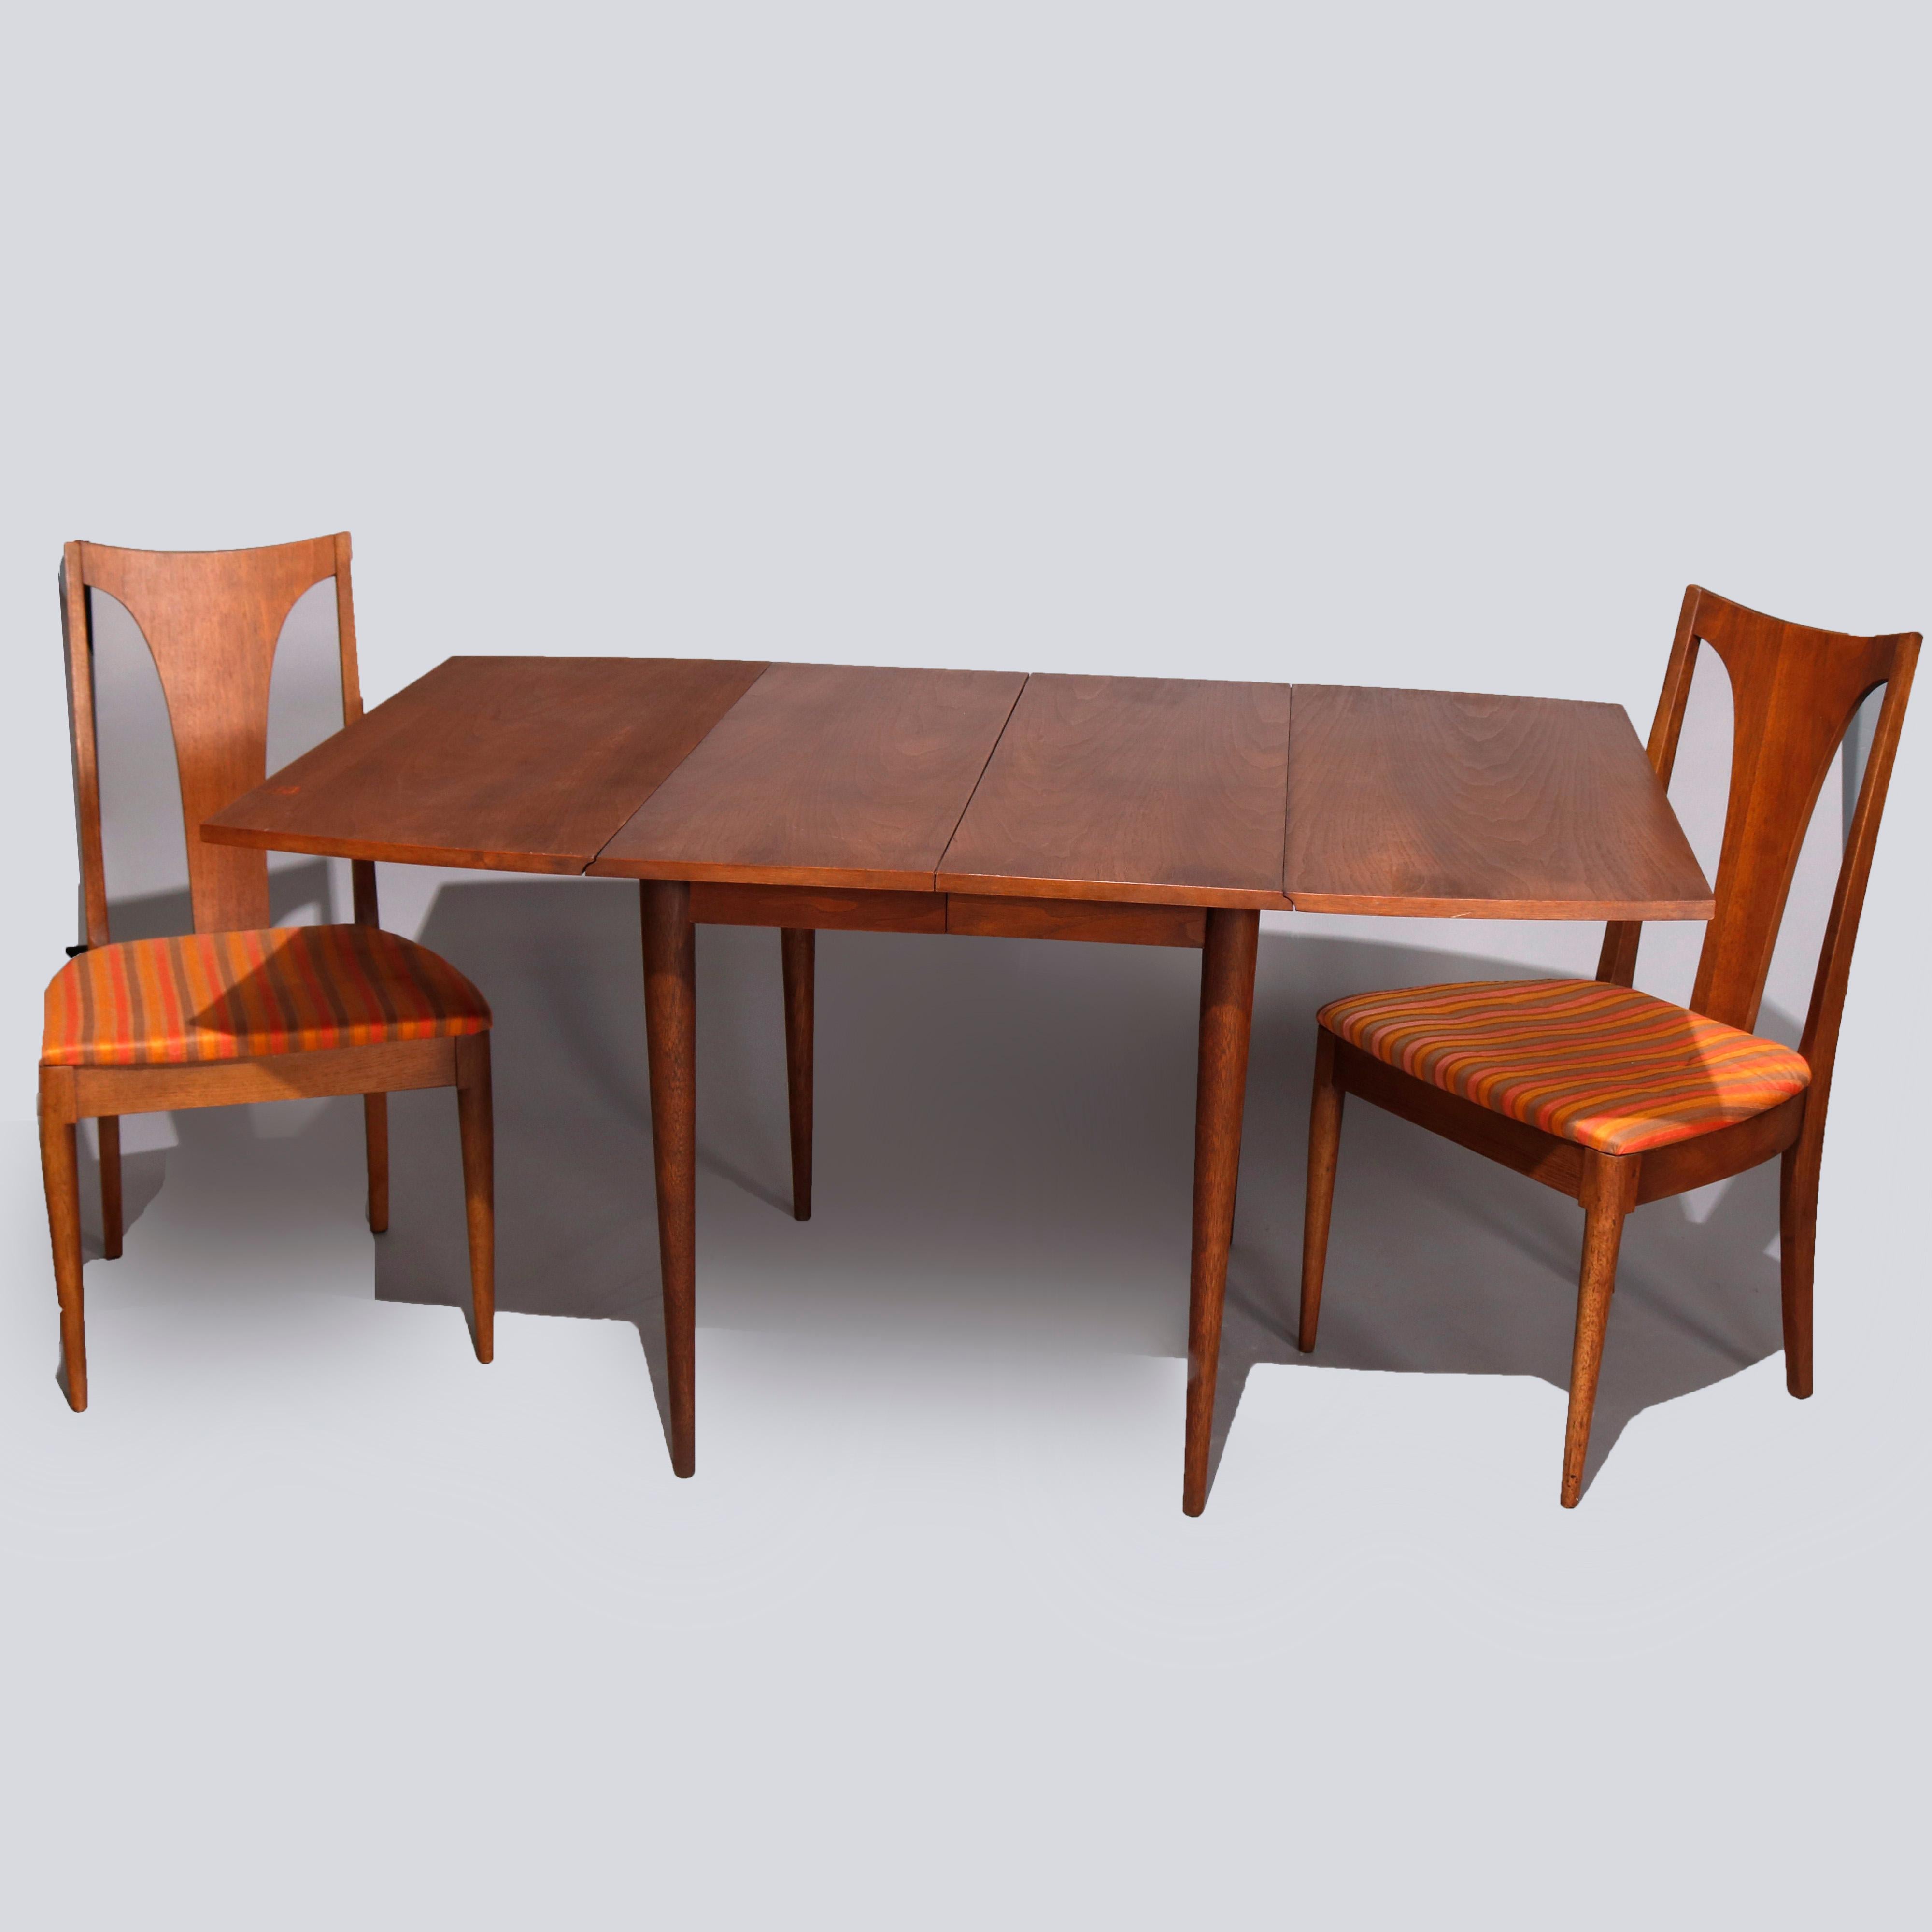 A midcentury Danish modern dining set by Broyhill offers walnut construction and includes extension dining table with three leaves raised on turned and tapered legs and four chairs with stylized curved T-backs and upholstered seats, 20th